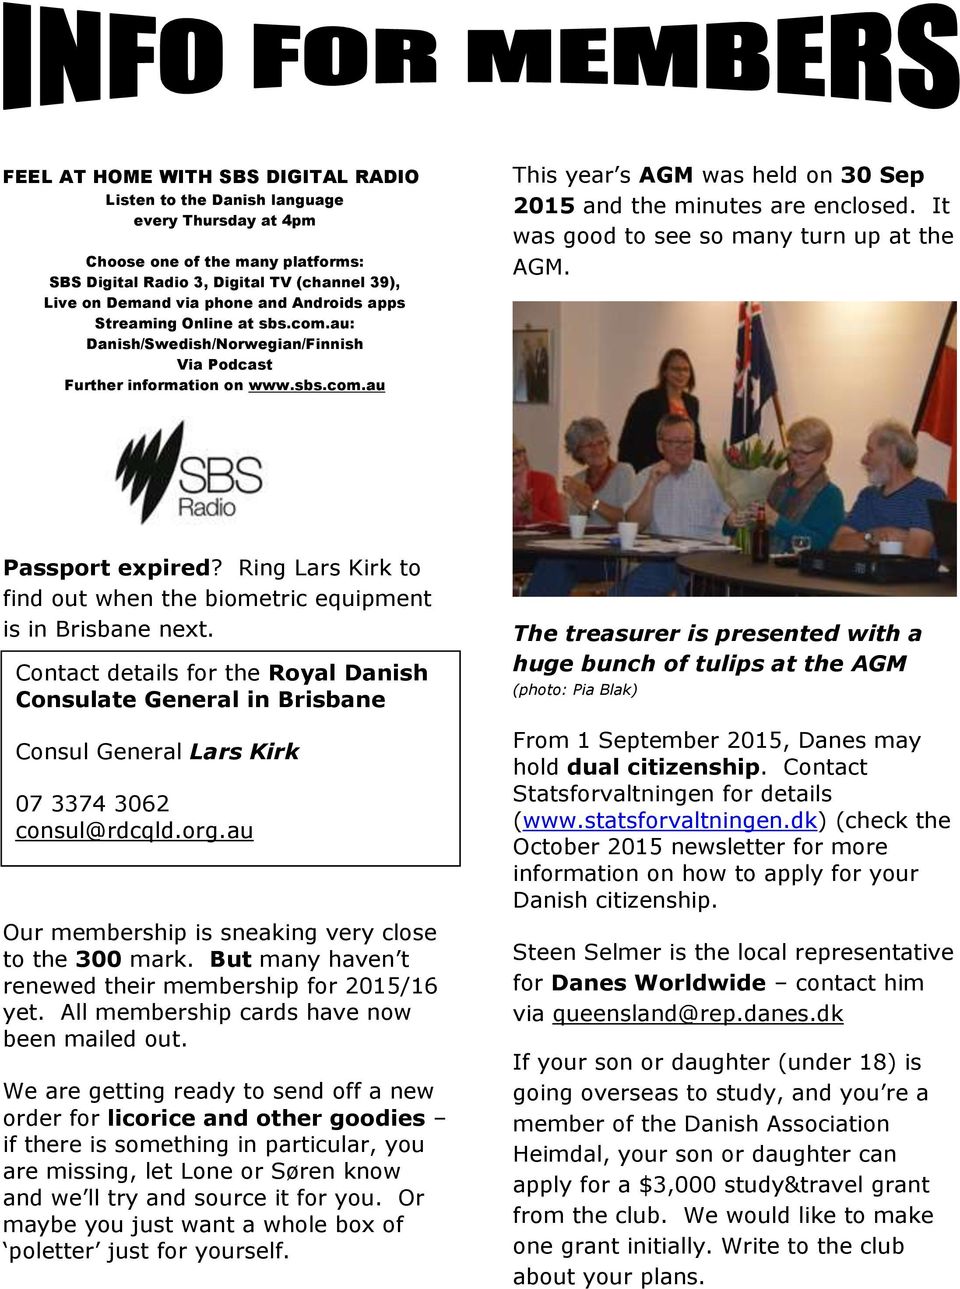 It was good to see so many turn up at the AGM. Error! Hyperlink refd. Passport expired? Ring Lars Kirk to find out when the biometric equipment is in Brisbane next.